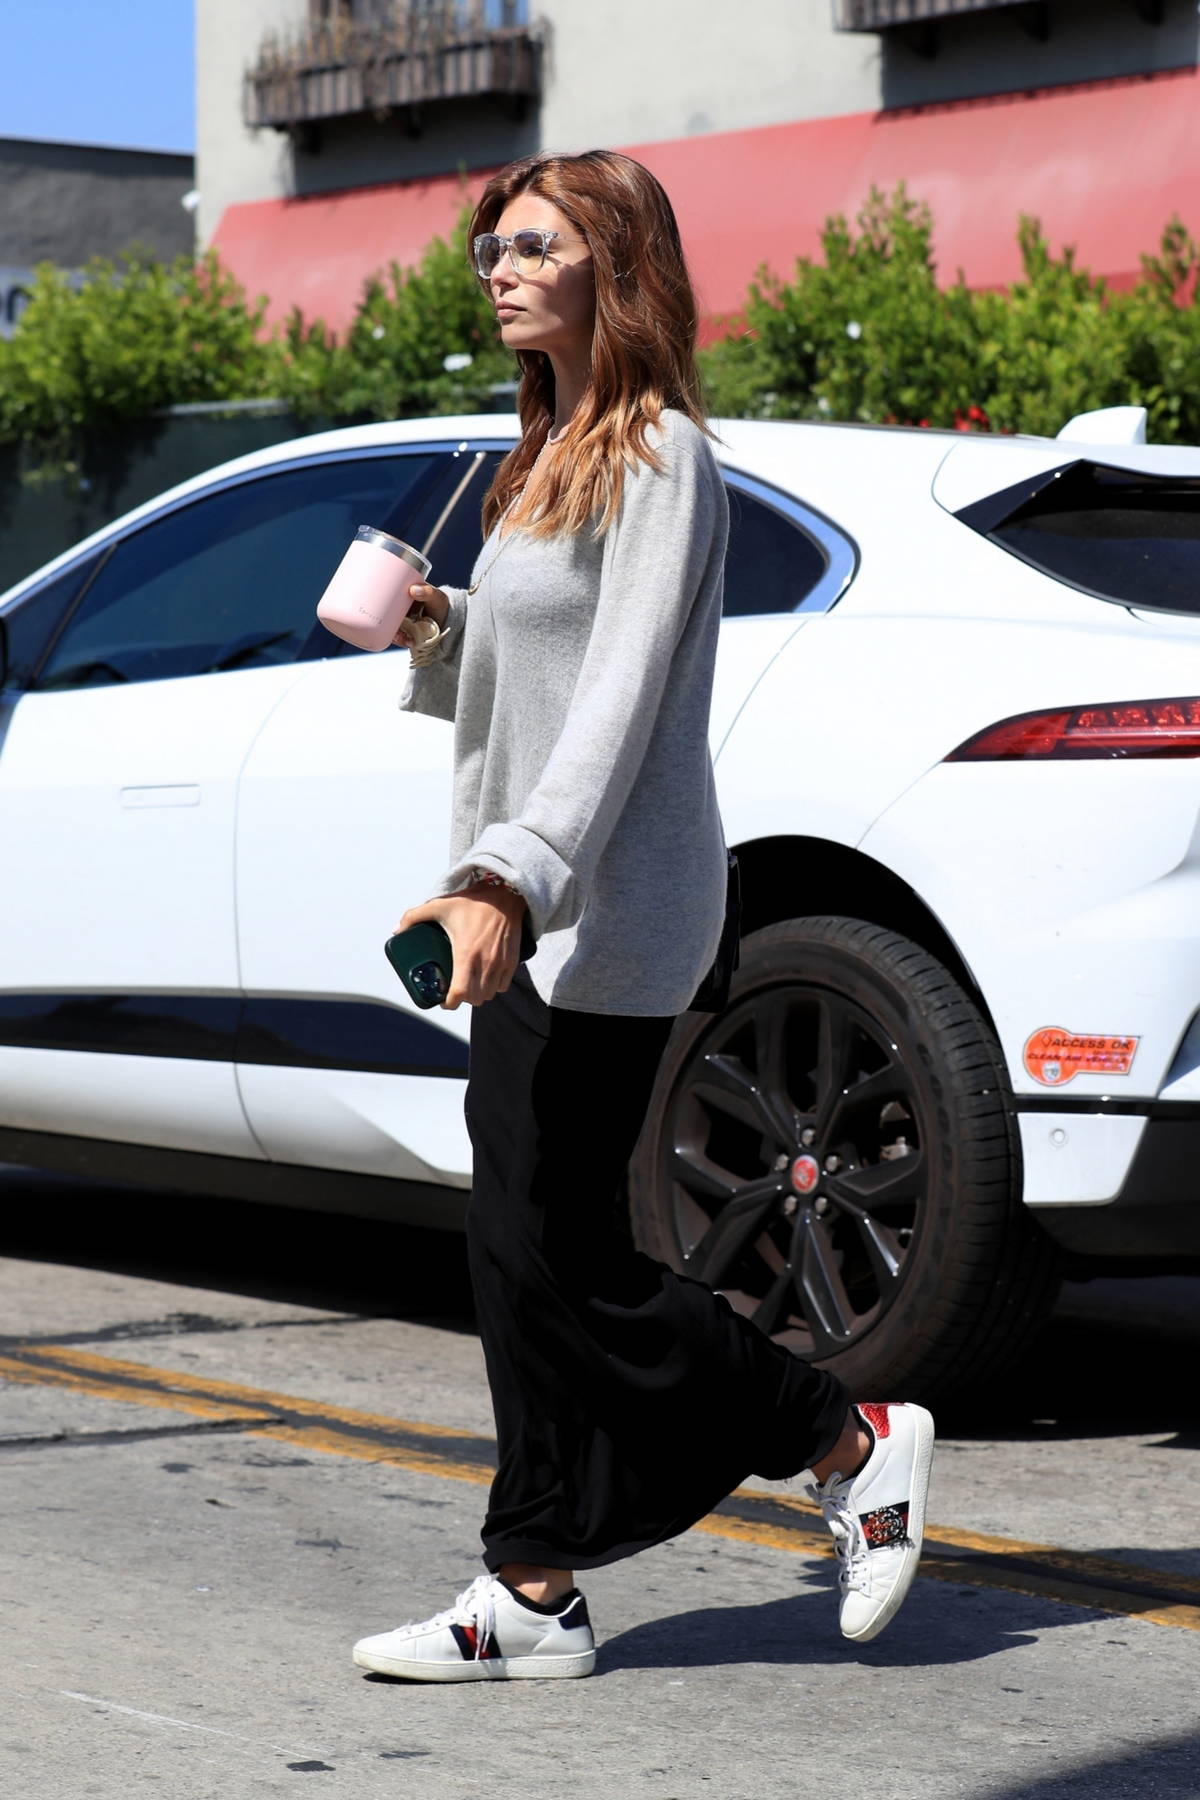 Sydney Sweeney shows off her fab physique in a grey sports bra and leggings  while heading